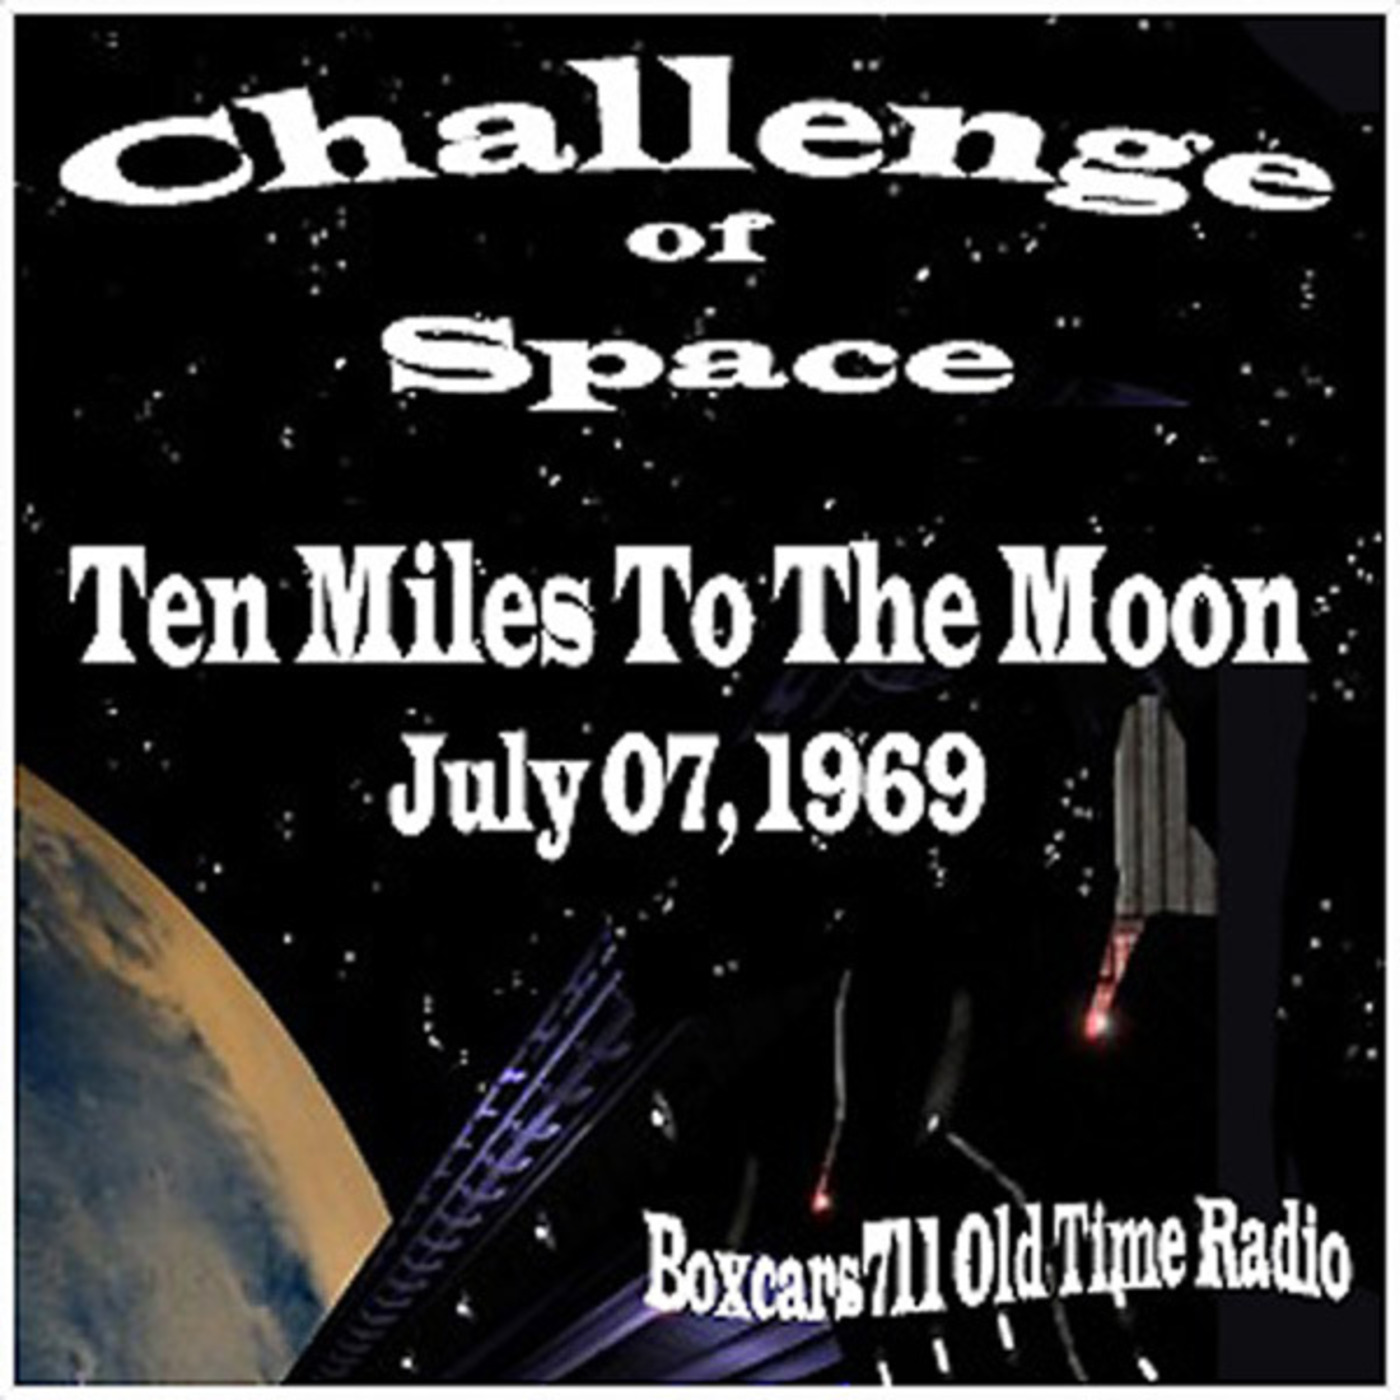 Episode 9615: Challenge Of Space - Ten Miles To The Moon (07-07-69)